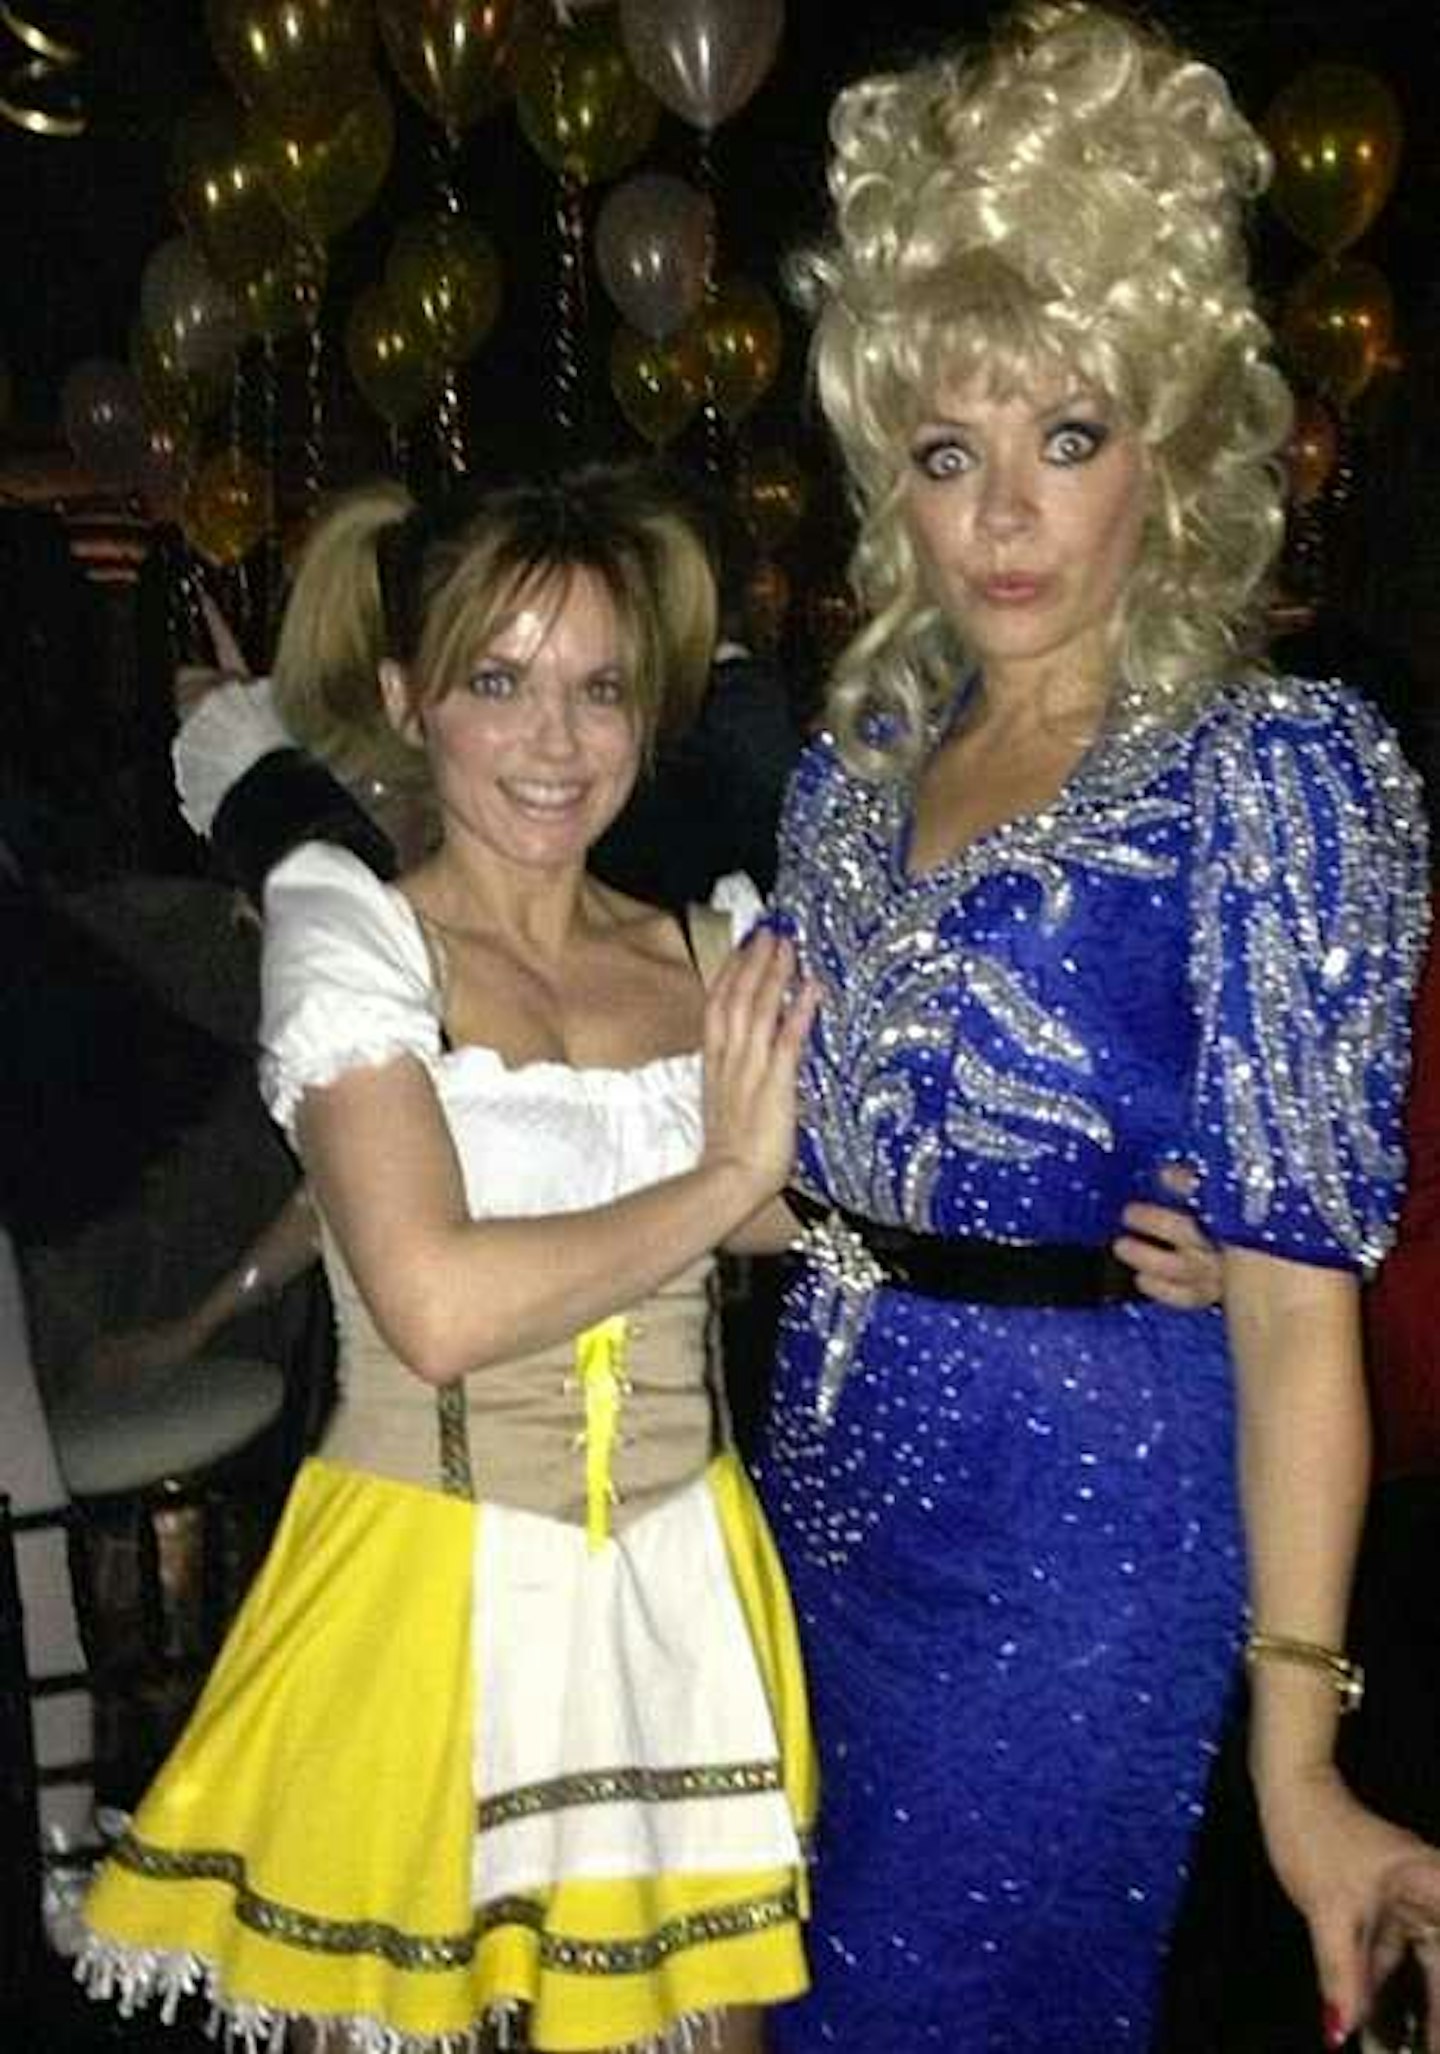 Holly Willougby as Dolly Parton